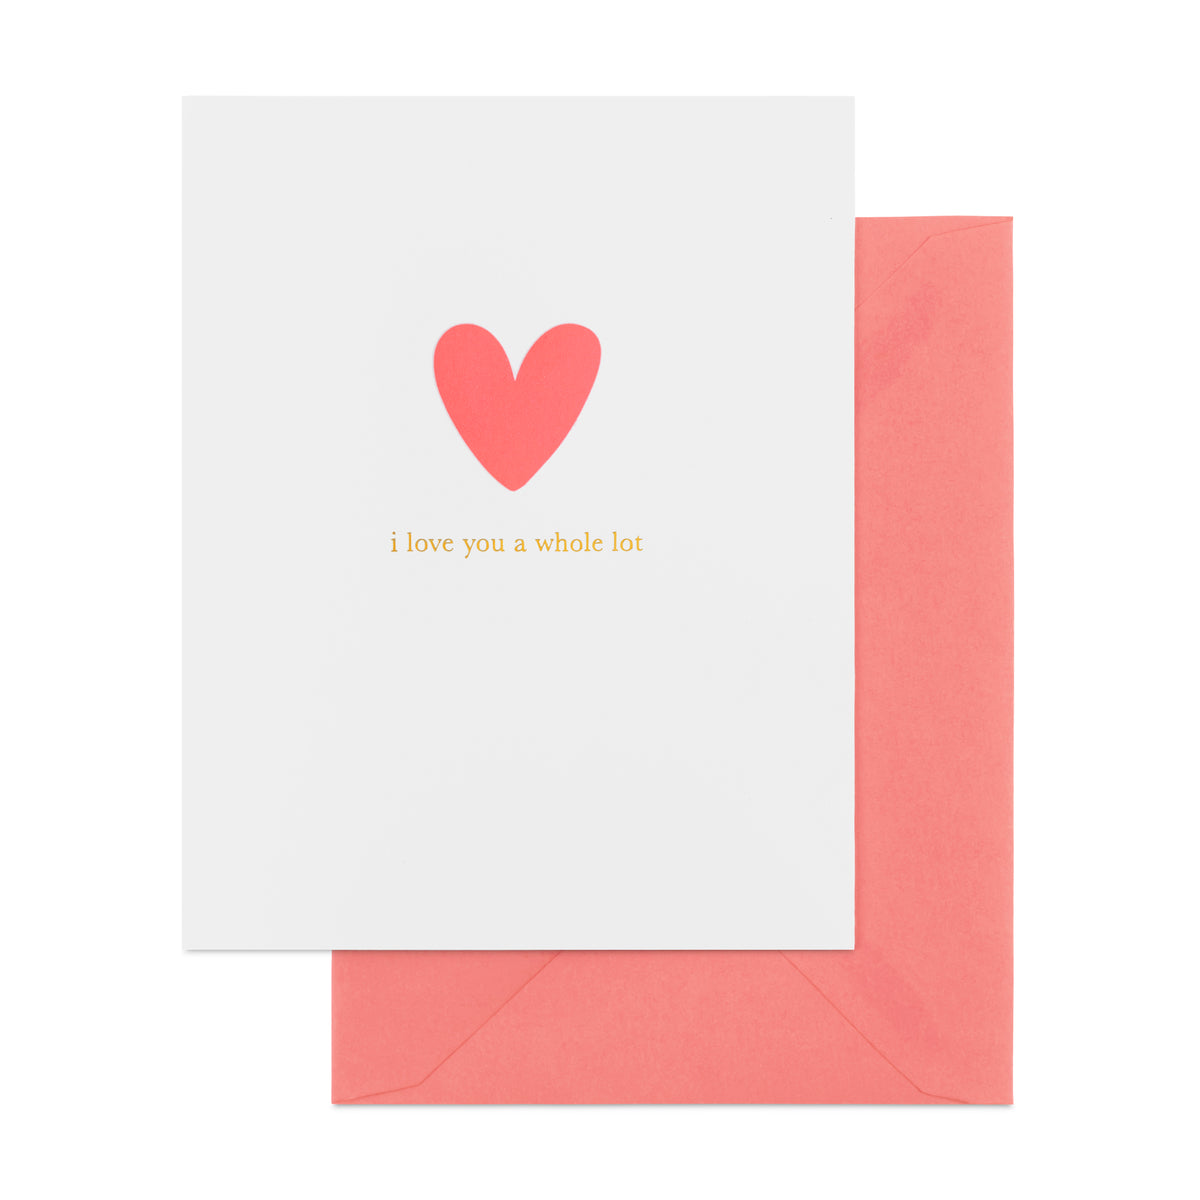 white card with neon pink heart and gold foil "I love you a whole lot", neon pink envelope